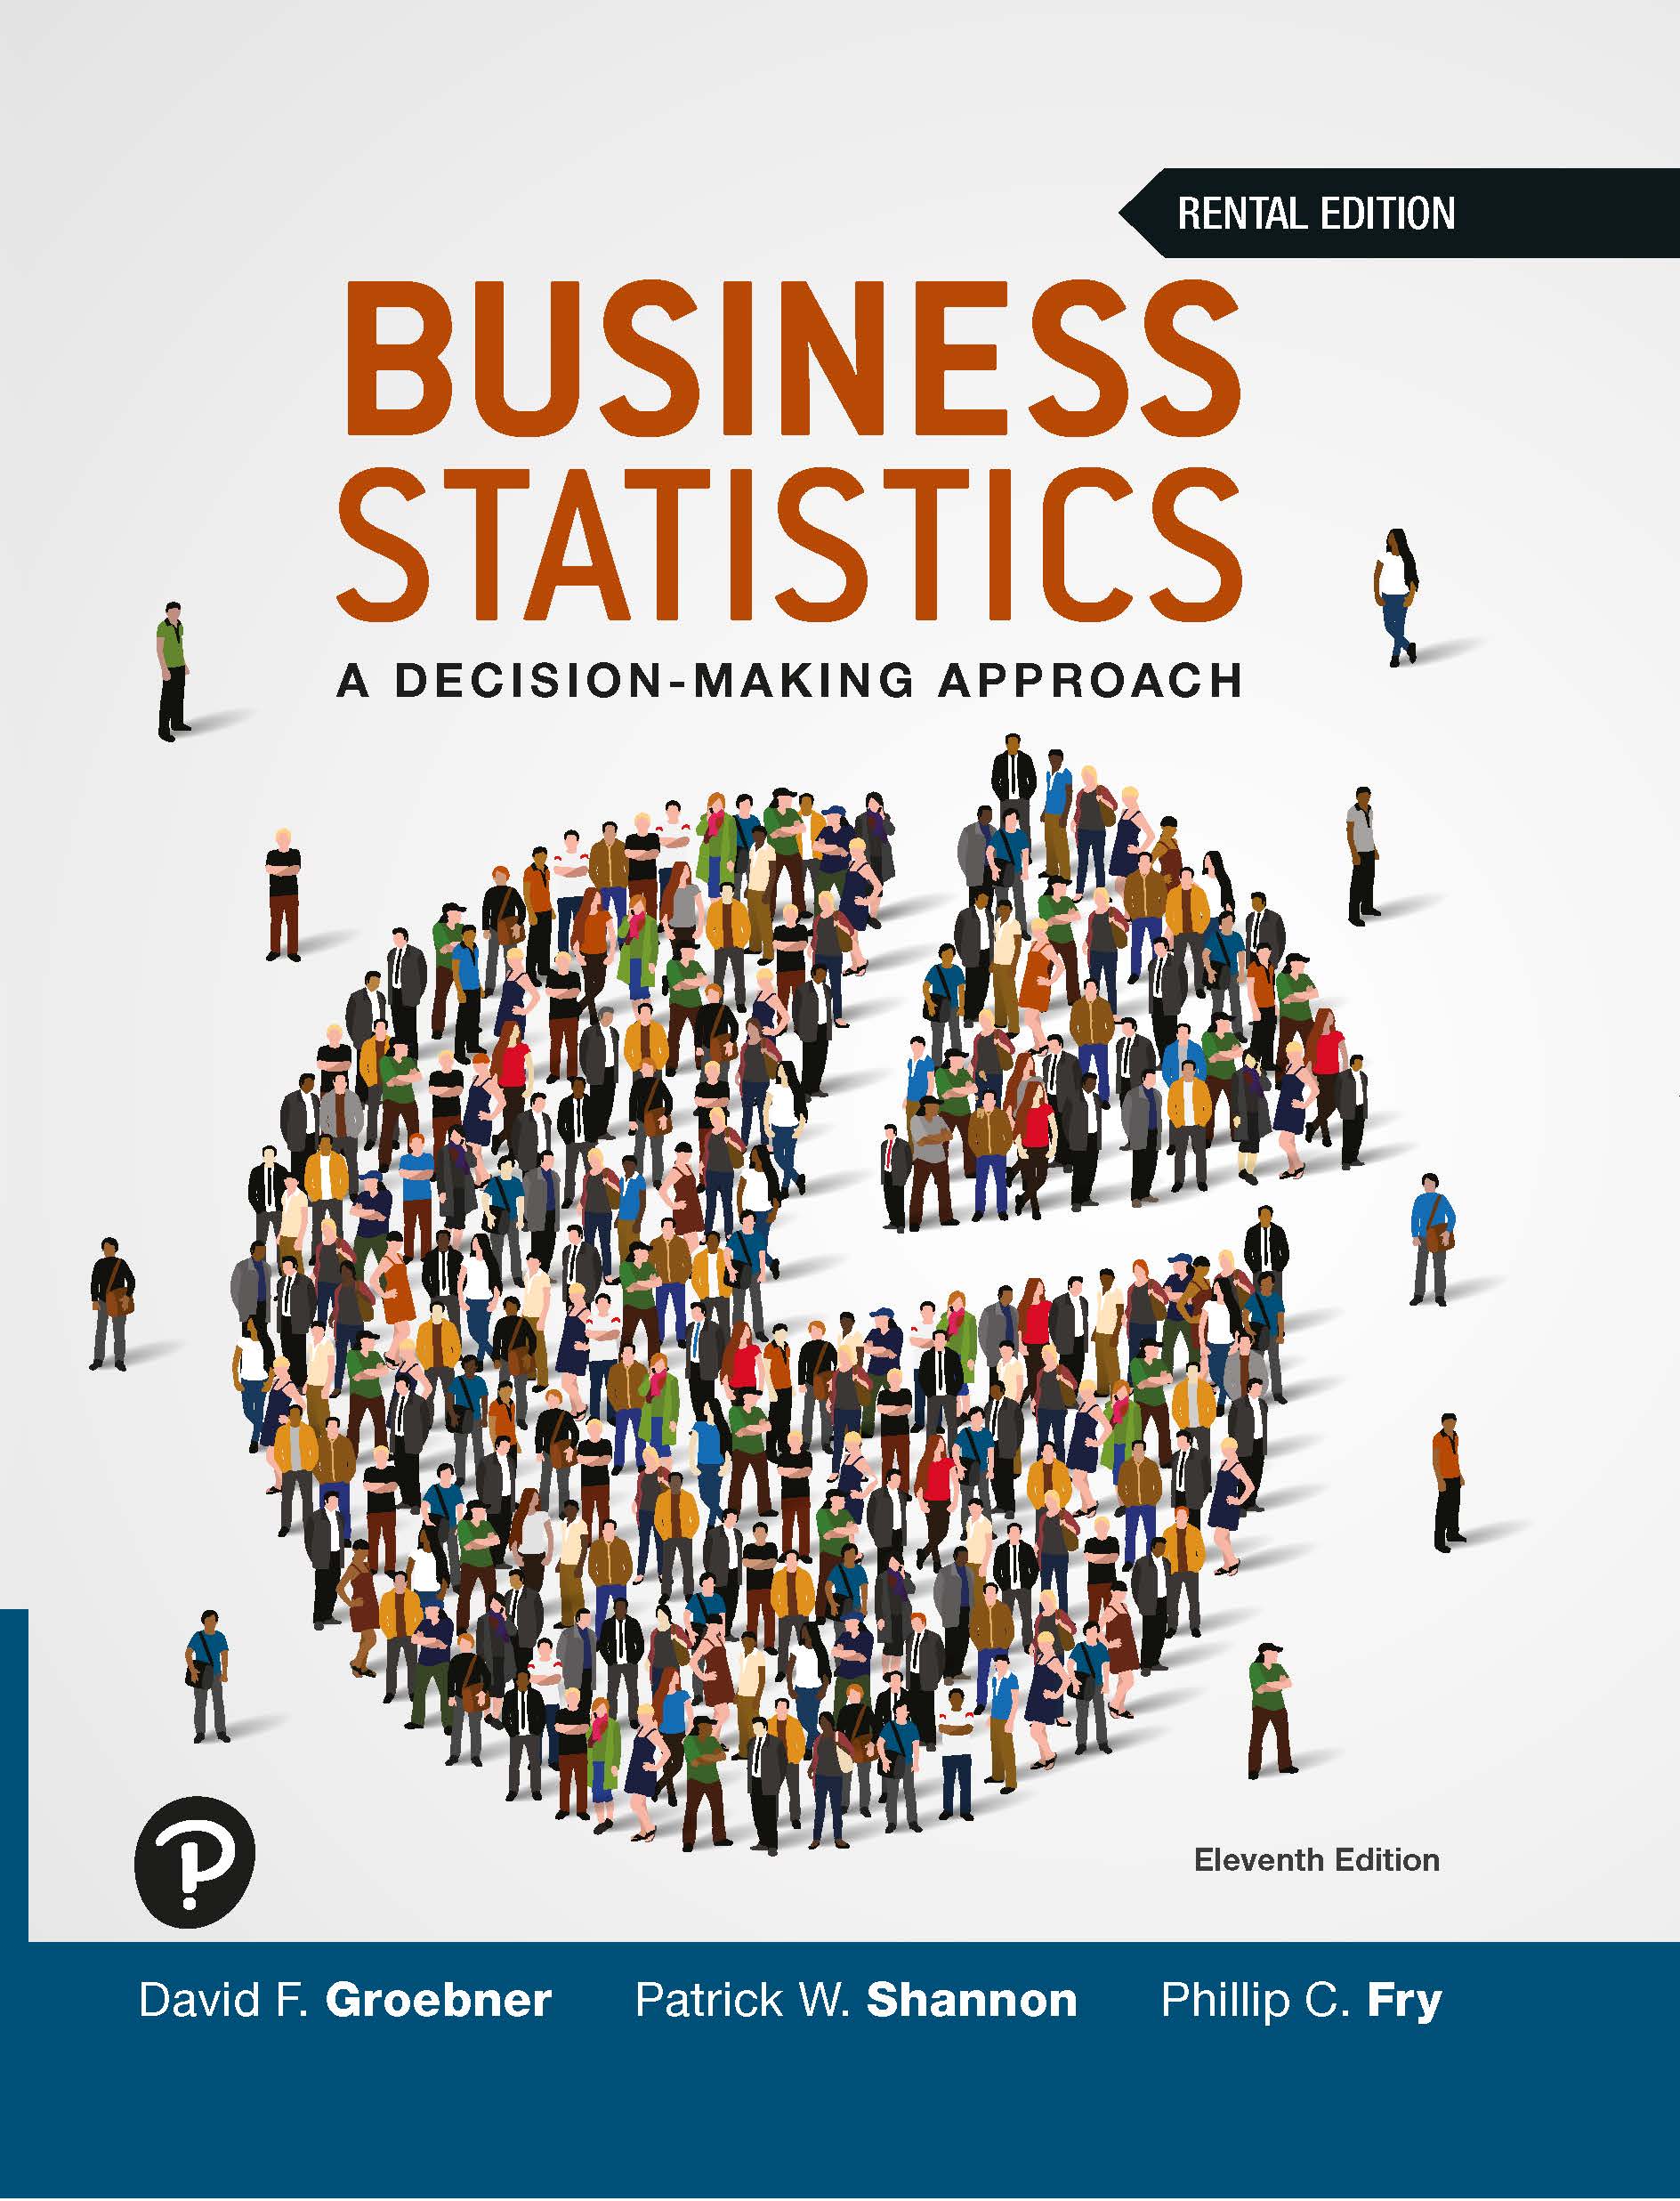 Cover design for the 11th edition of Business Statistics showing a pie chart comprised of a large crowd of people